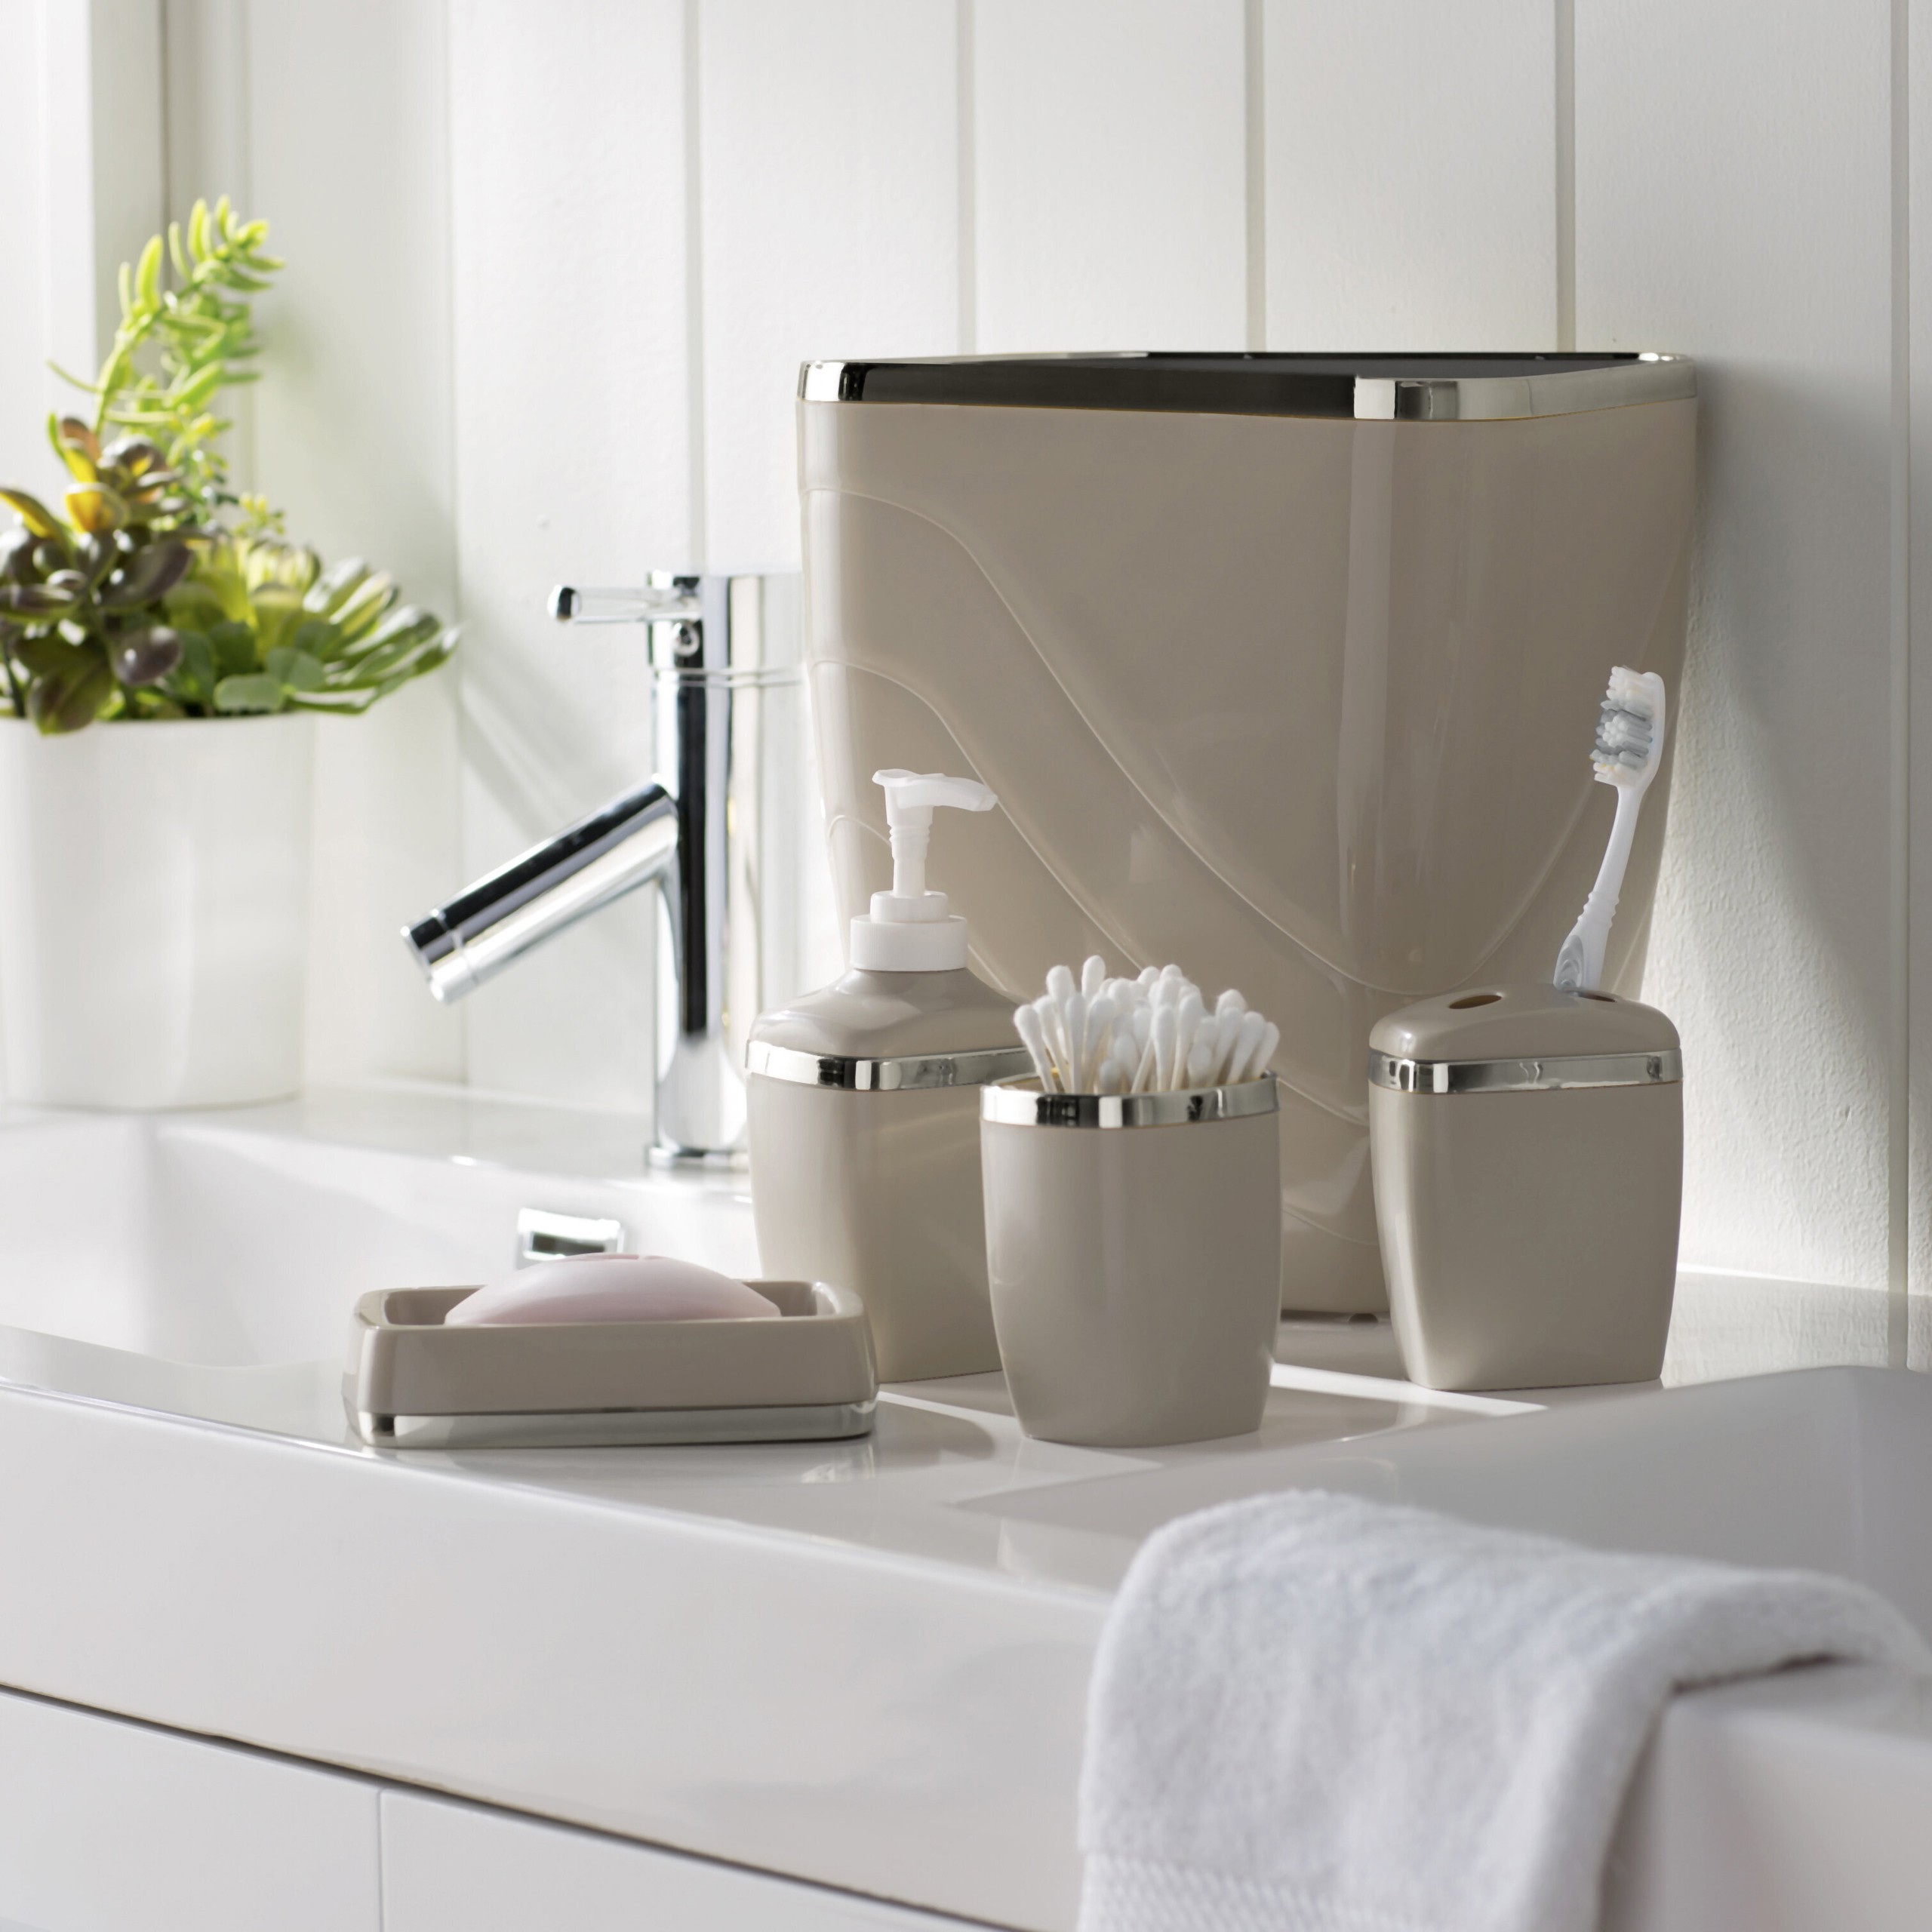 Bathroom Accessories: How to Choose Them